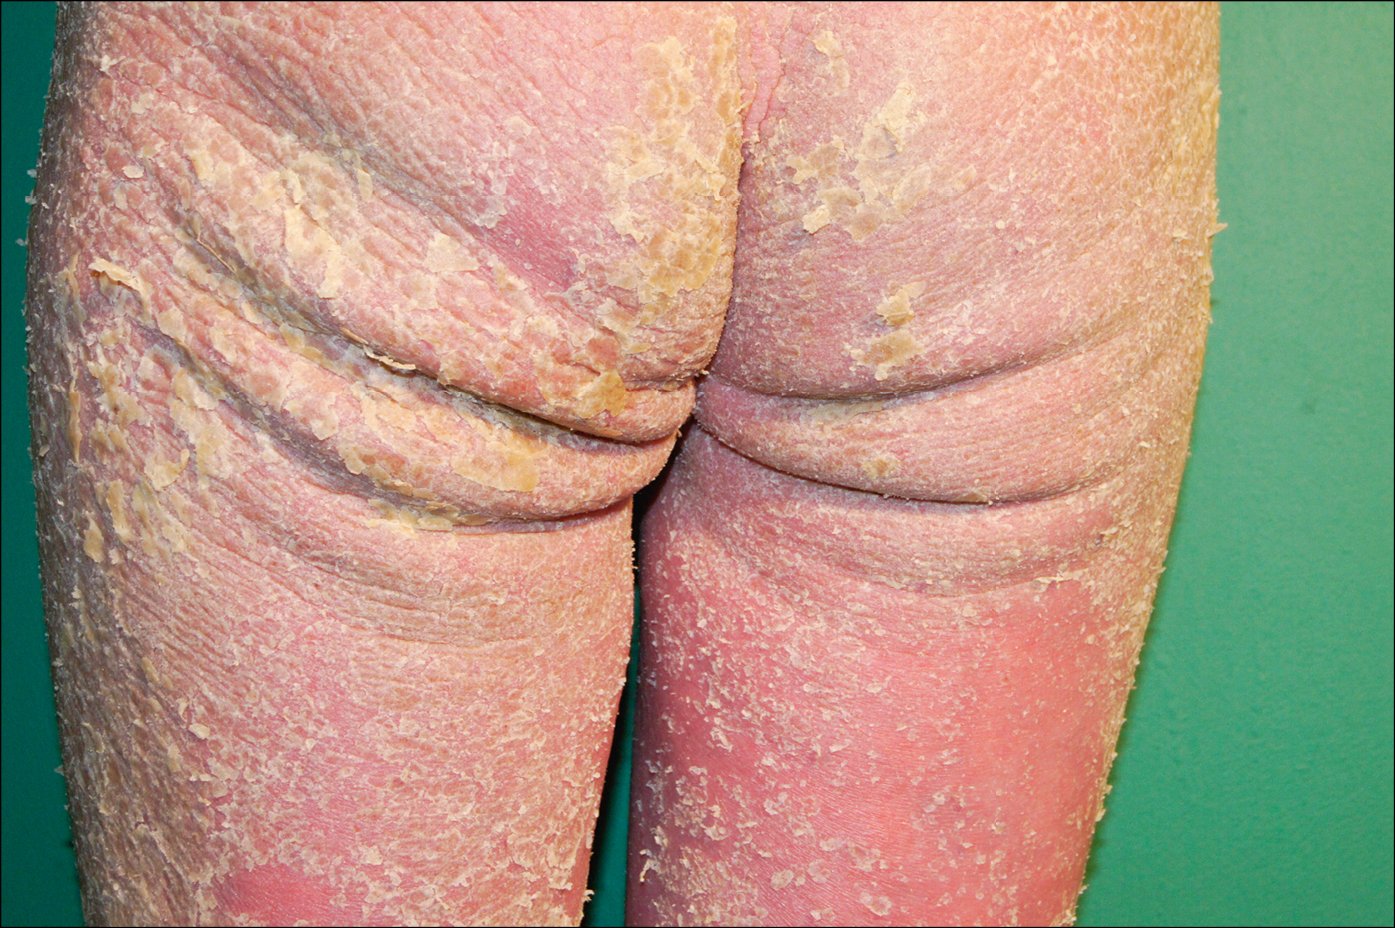 Figure 031_4087.  
Crusted scabies with visible erythroderma and pronounced hyperkeratosis. 